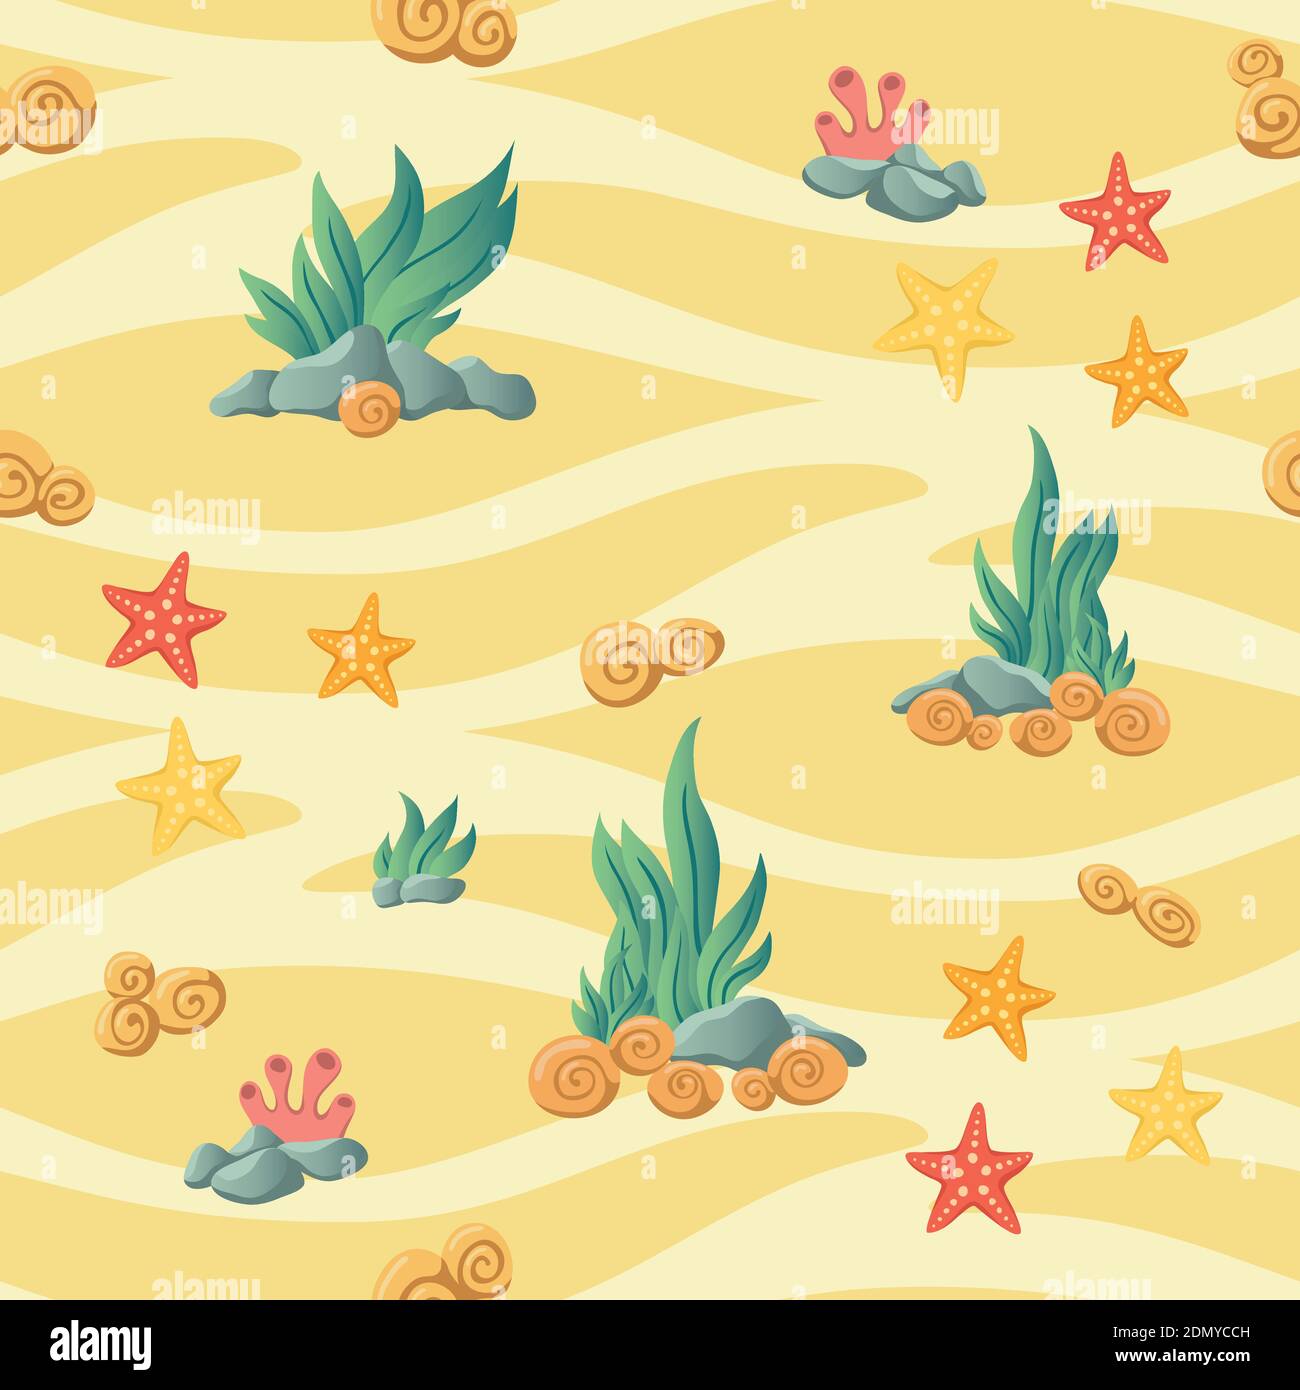 Sea seamless pattern on a beige background Stock Vector